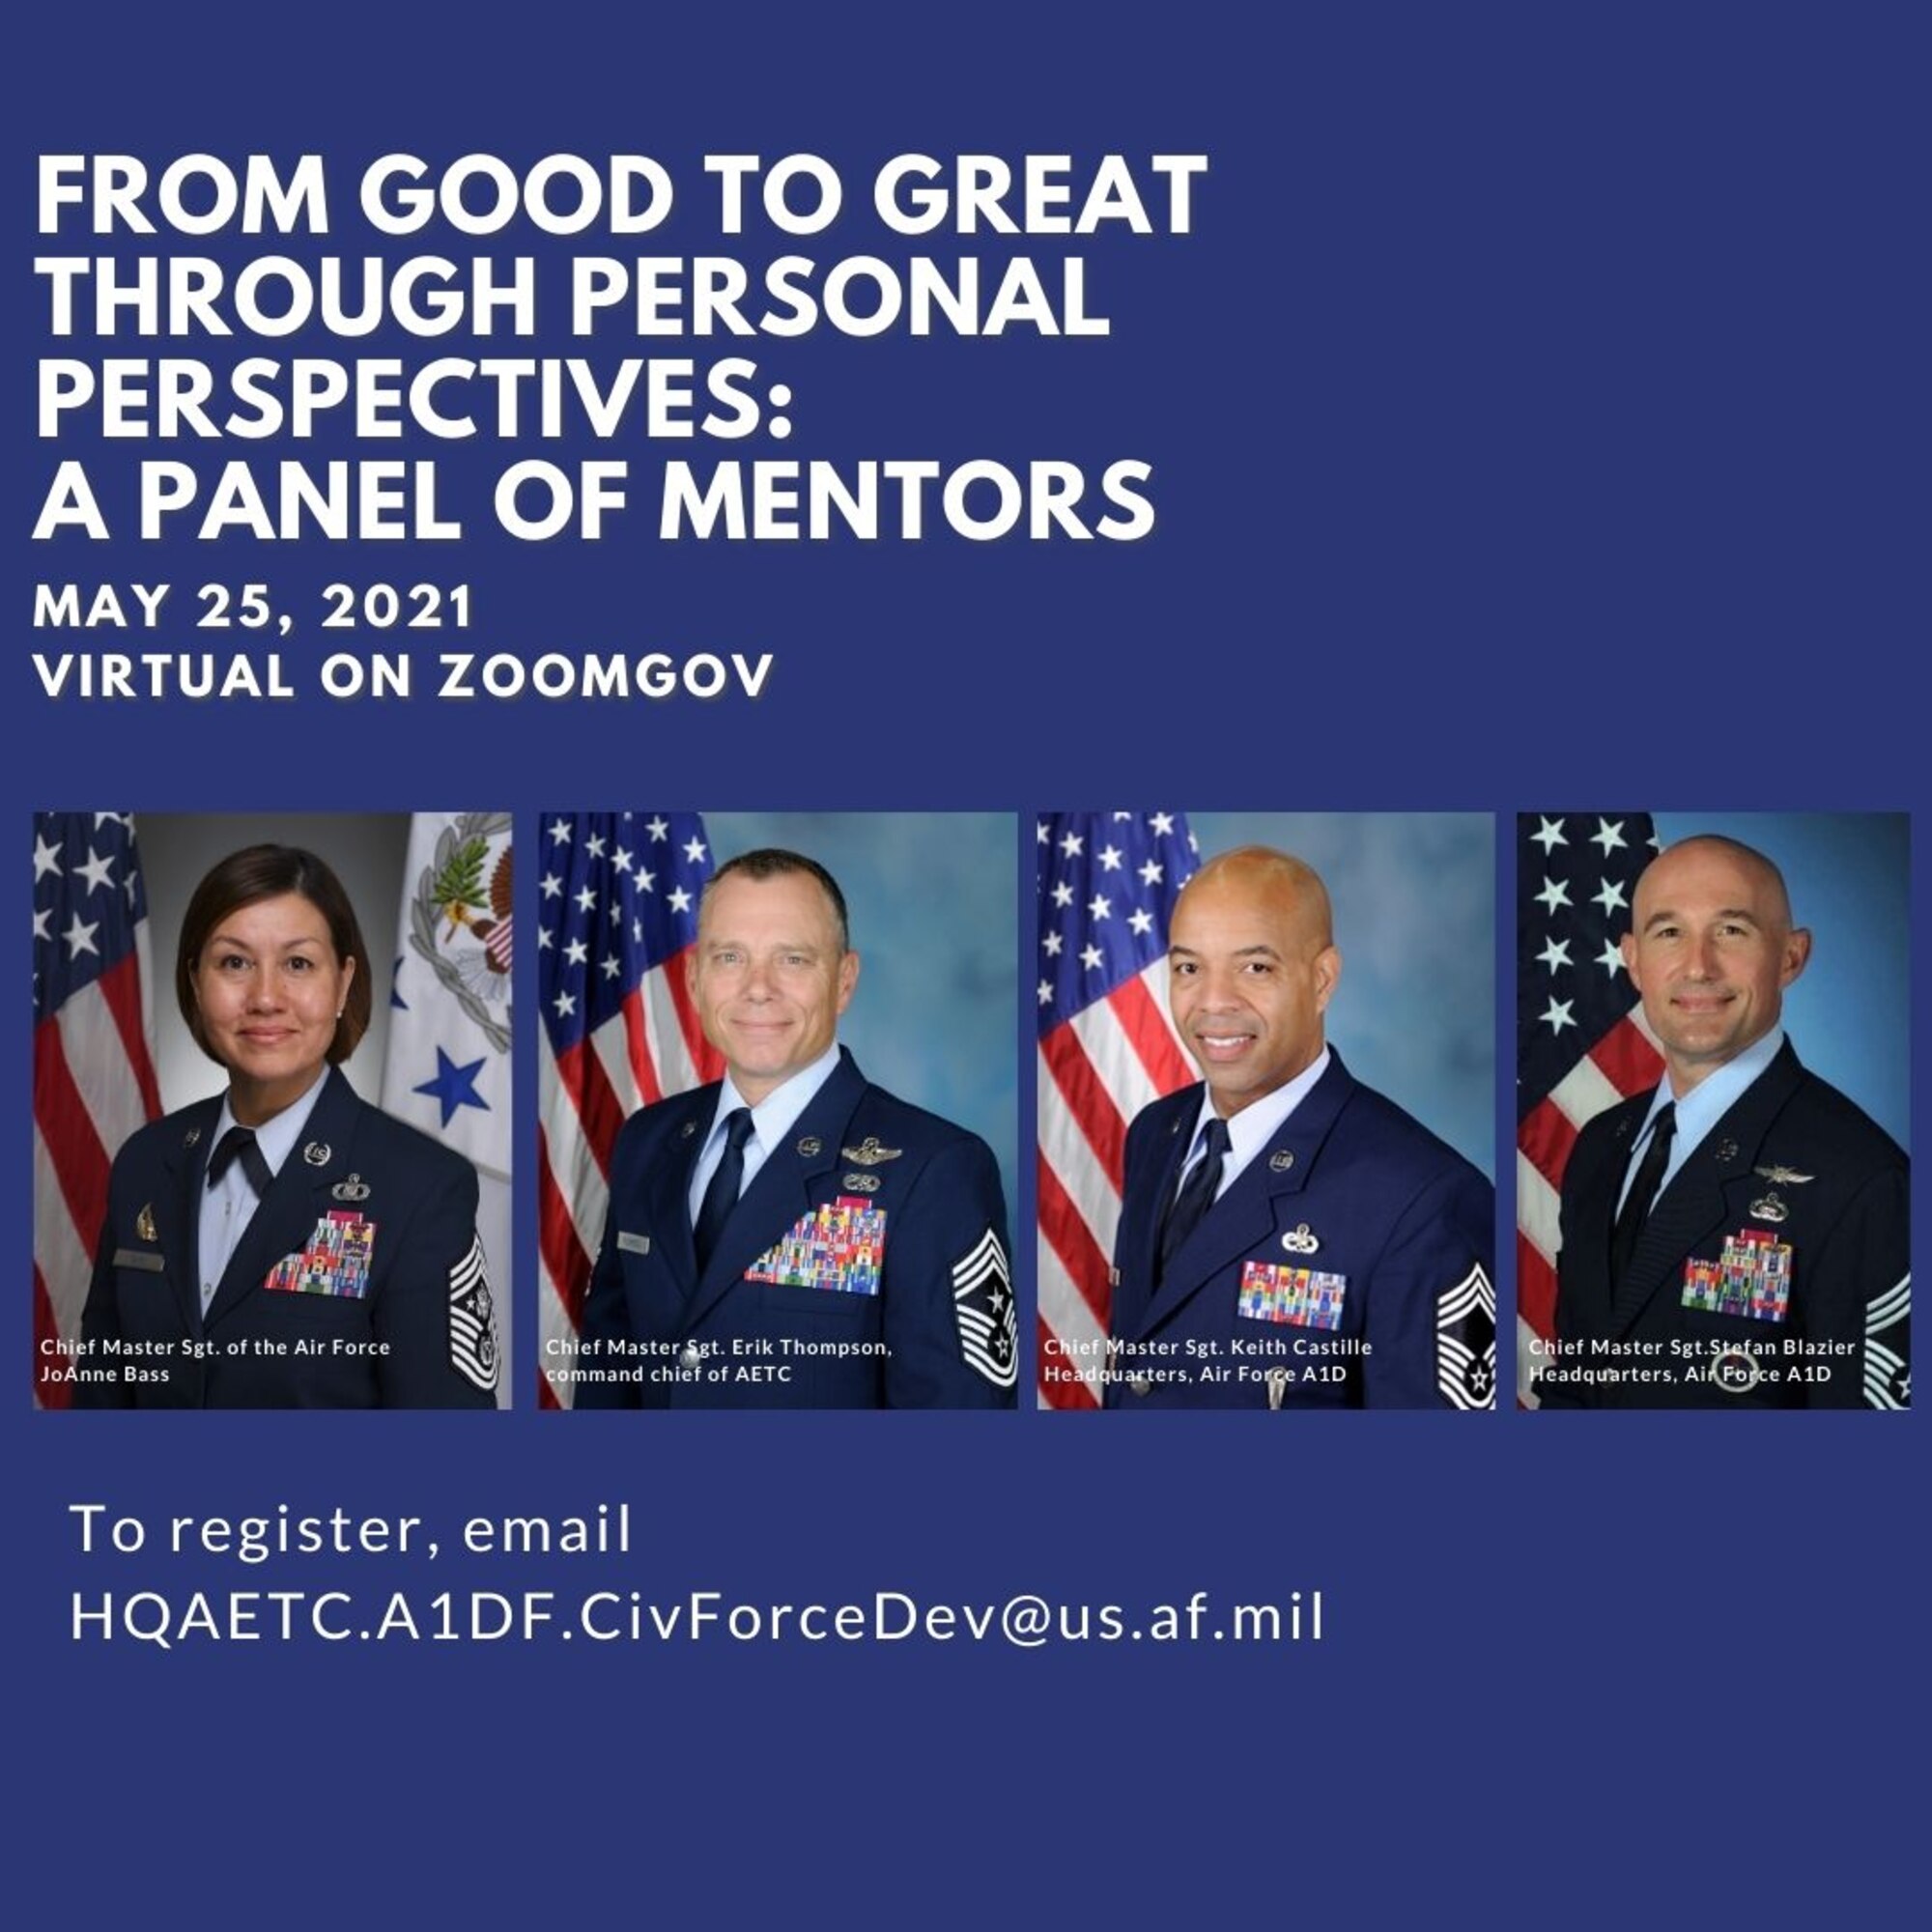 Graphic with panel members images: Chief Master Sgt. of the Air Force JoAnne Bass, Chief Master Sgt. Erik C. Thompson, command chief of AETC, Chief Master Sgt. Keith Castille and Chief Master Sgt. Stefan Blazier from Headquarters, Air Force A1D.